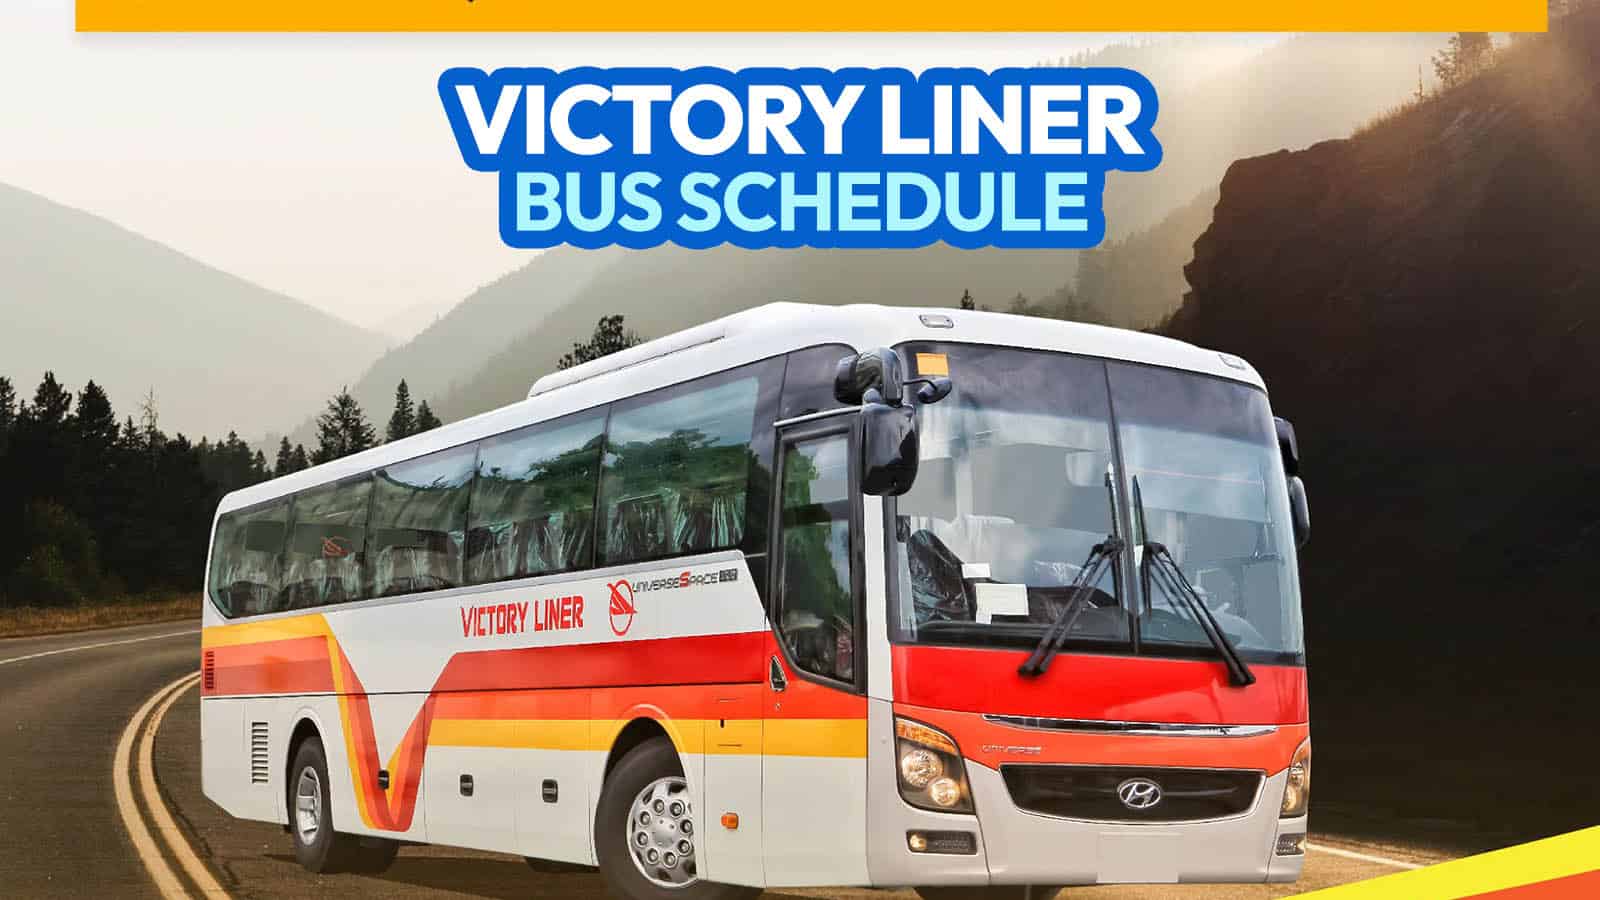 VICTORY LINER Bus Schedules for Manila, Baguio, Olongapo, Cagayan, Isabela, Pangasinan